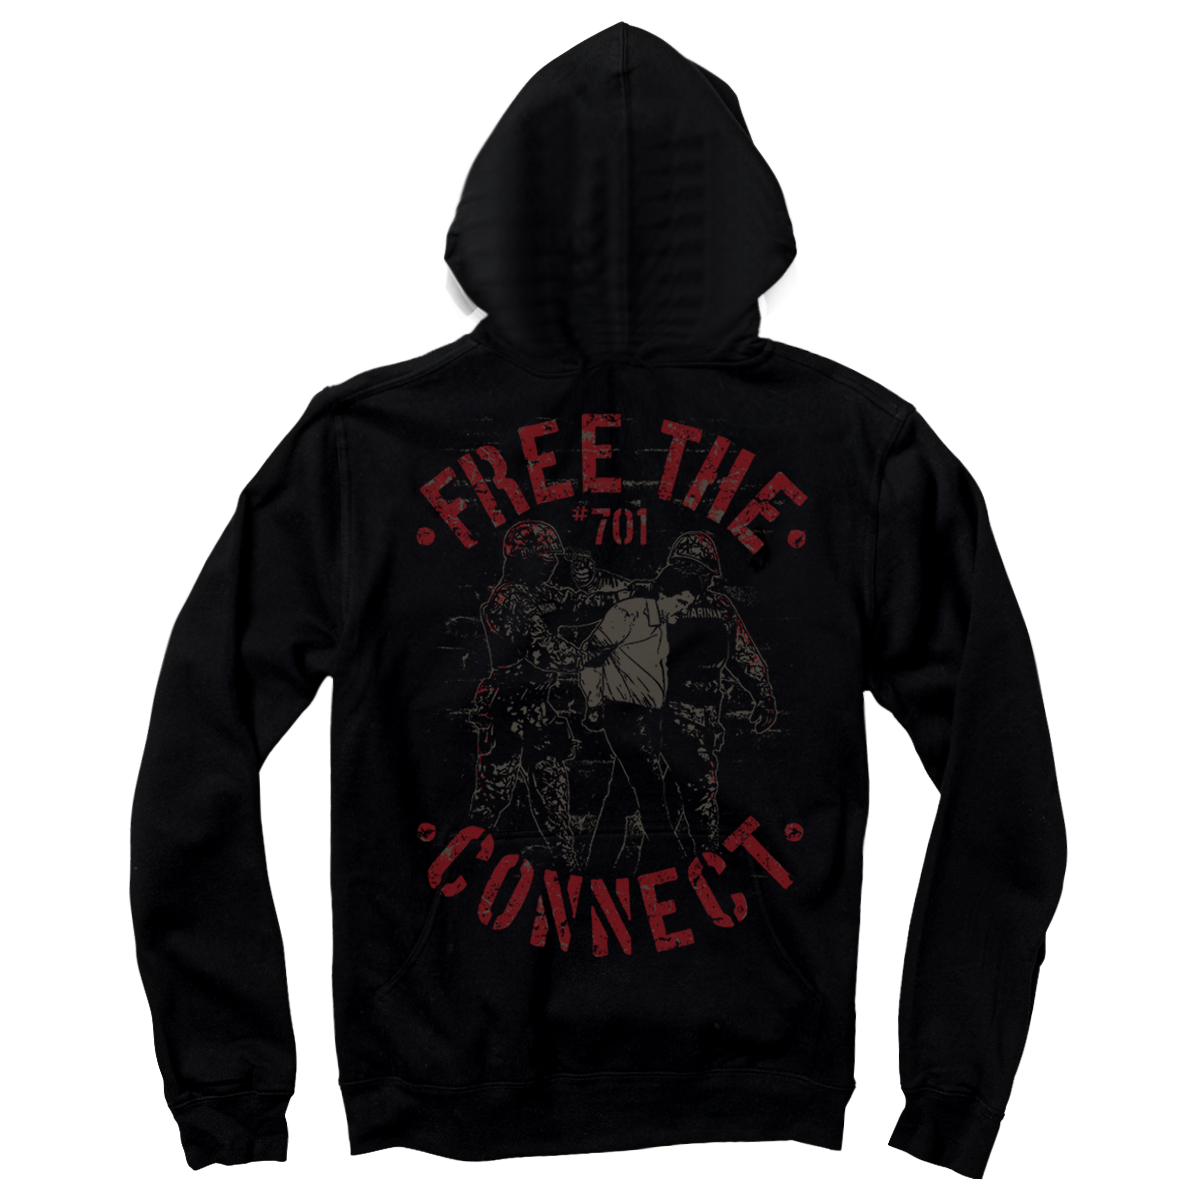 Free The connect Hoodie